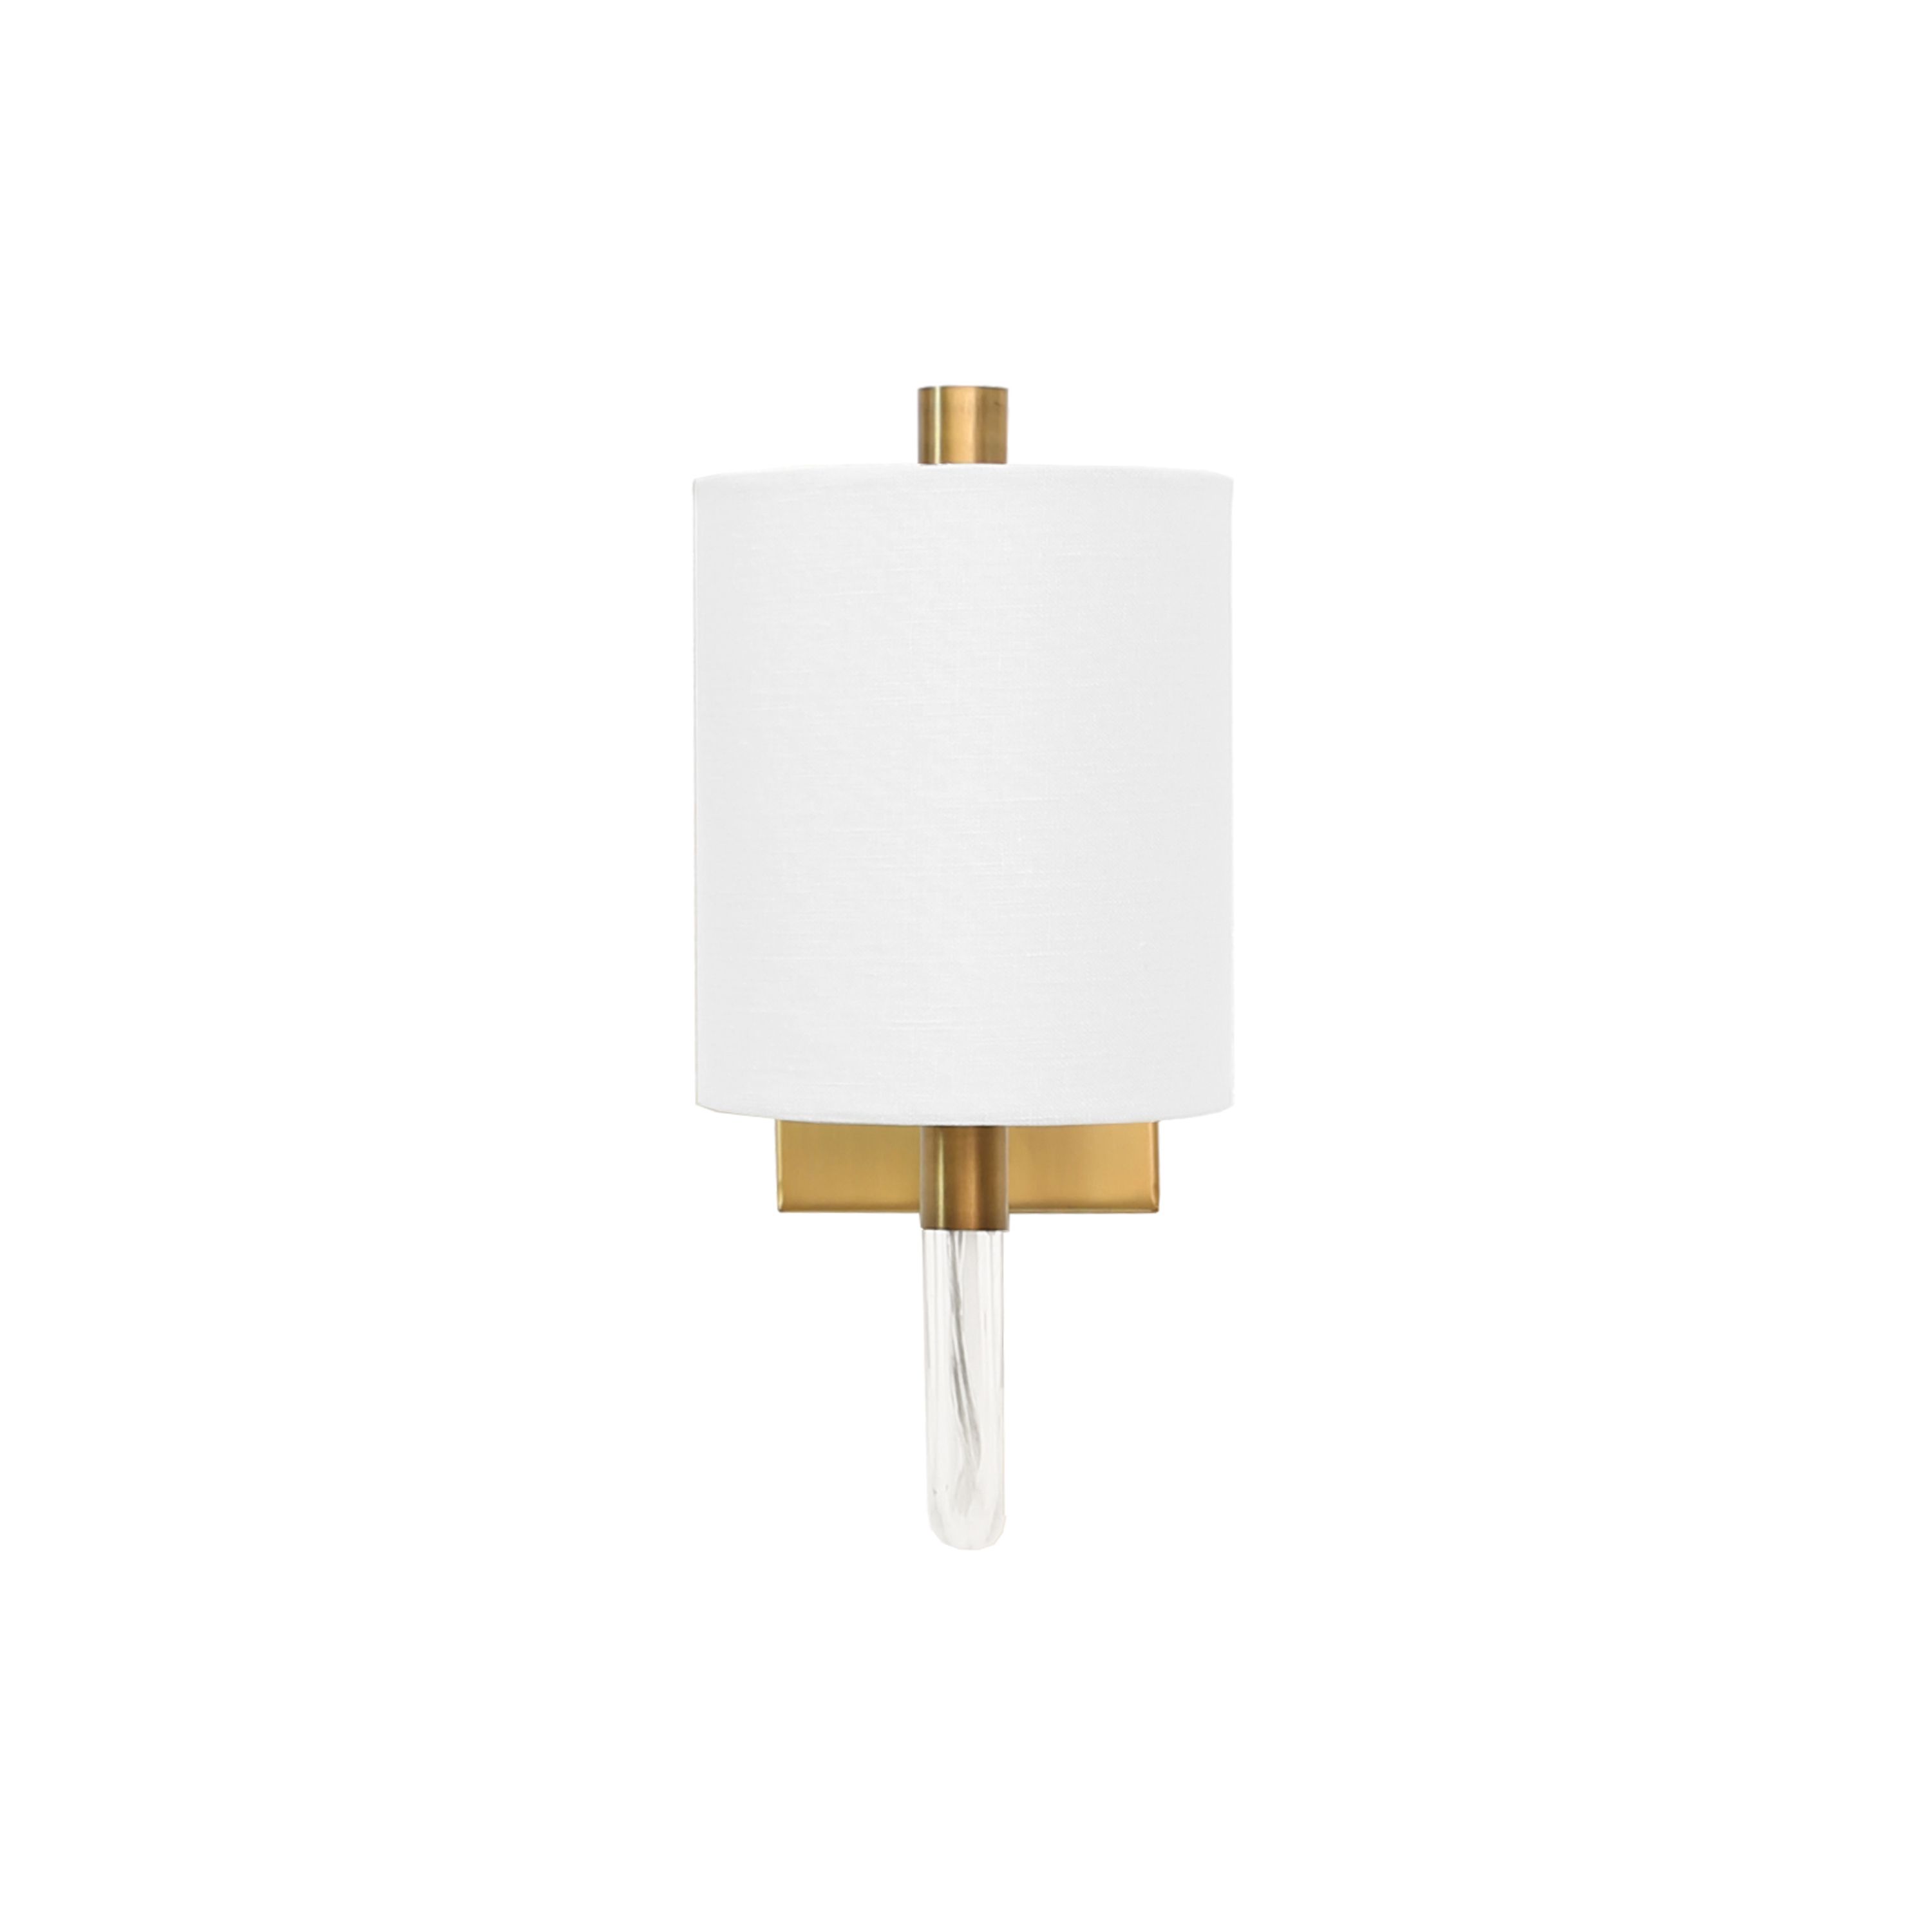 Sconce with Acrylic Neck & White Shade in Antique Brass